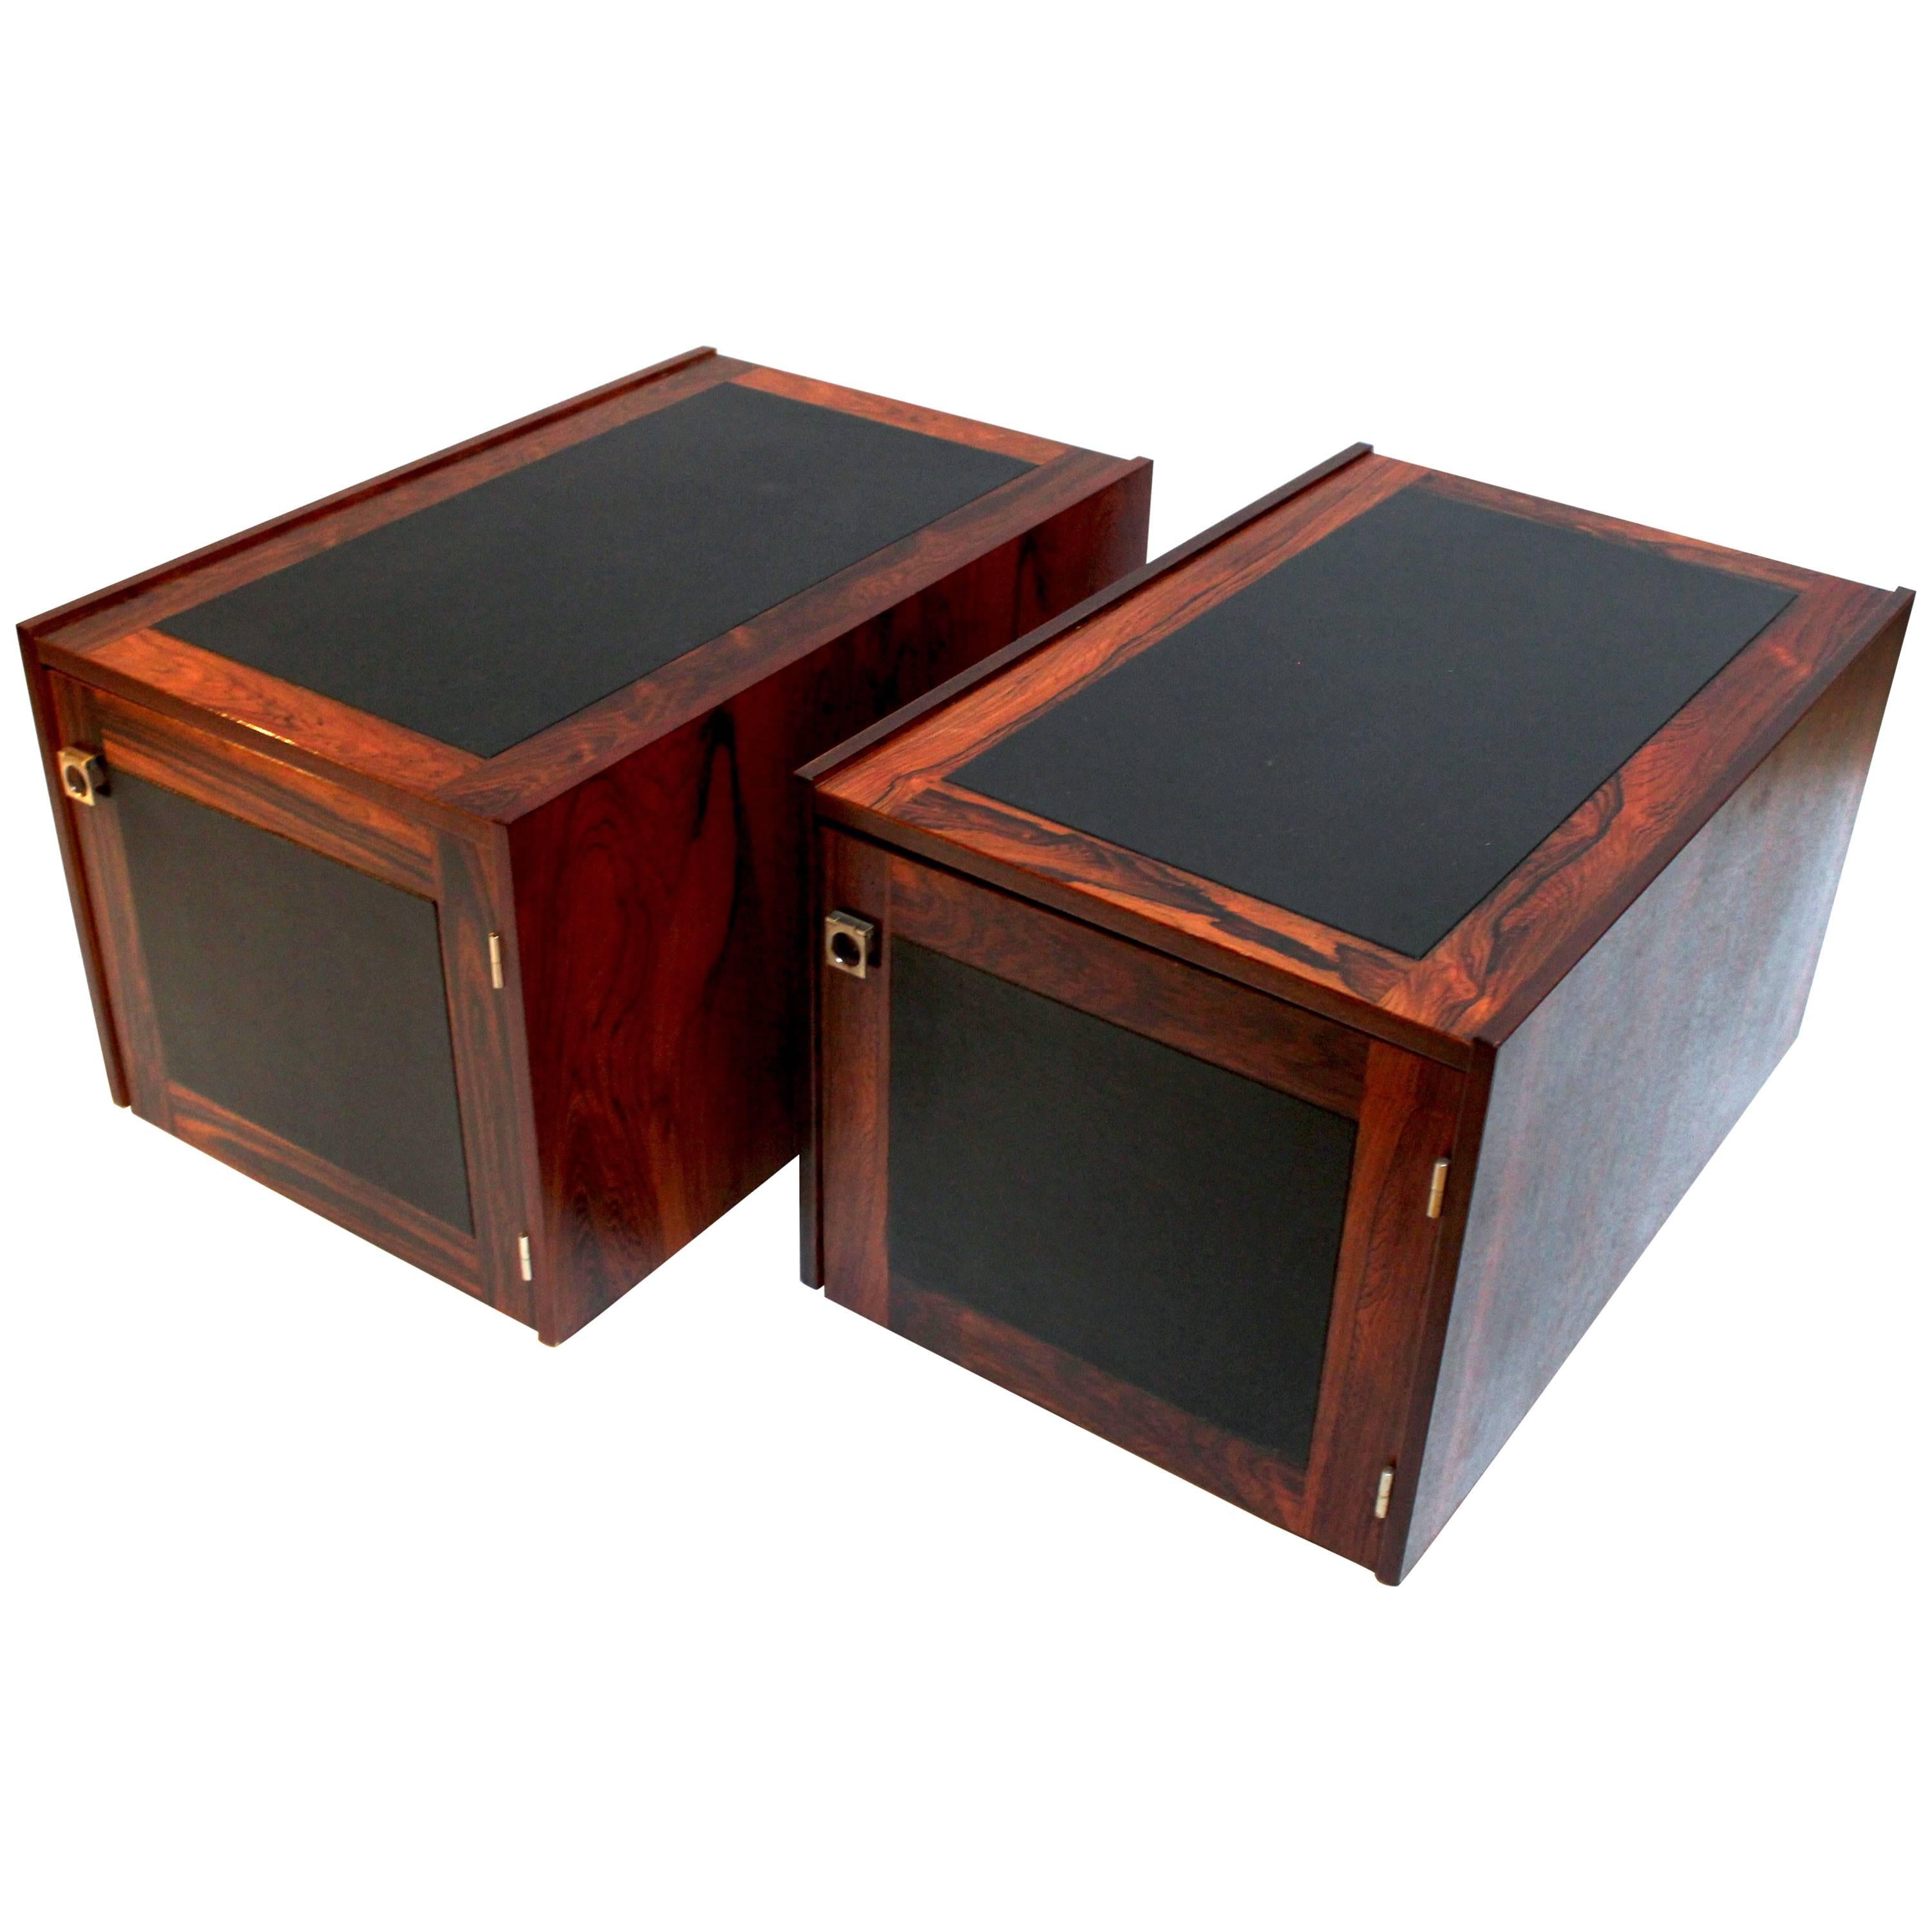 Pair of 1960s Danish Rosewood and Leather Side Tables with Storage by Bornholm For Sale